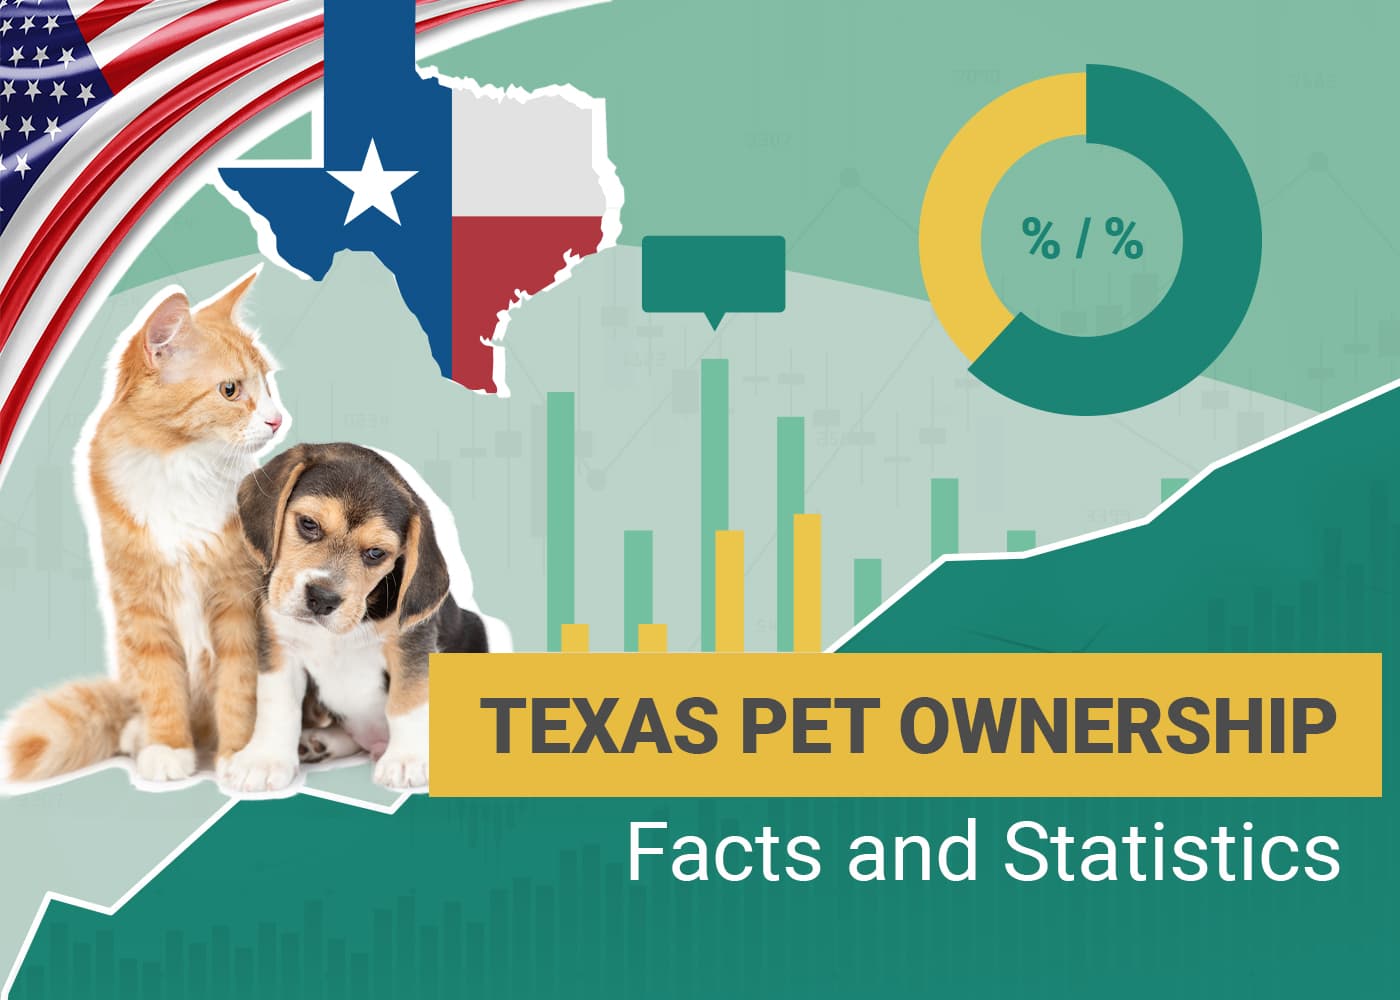 Texas Pet ownership Facts and Statistics